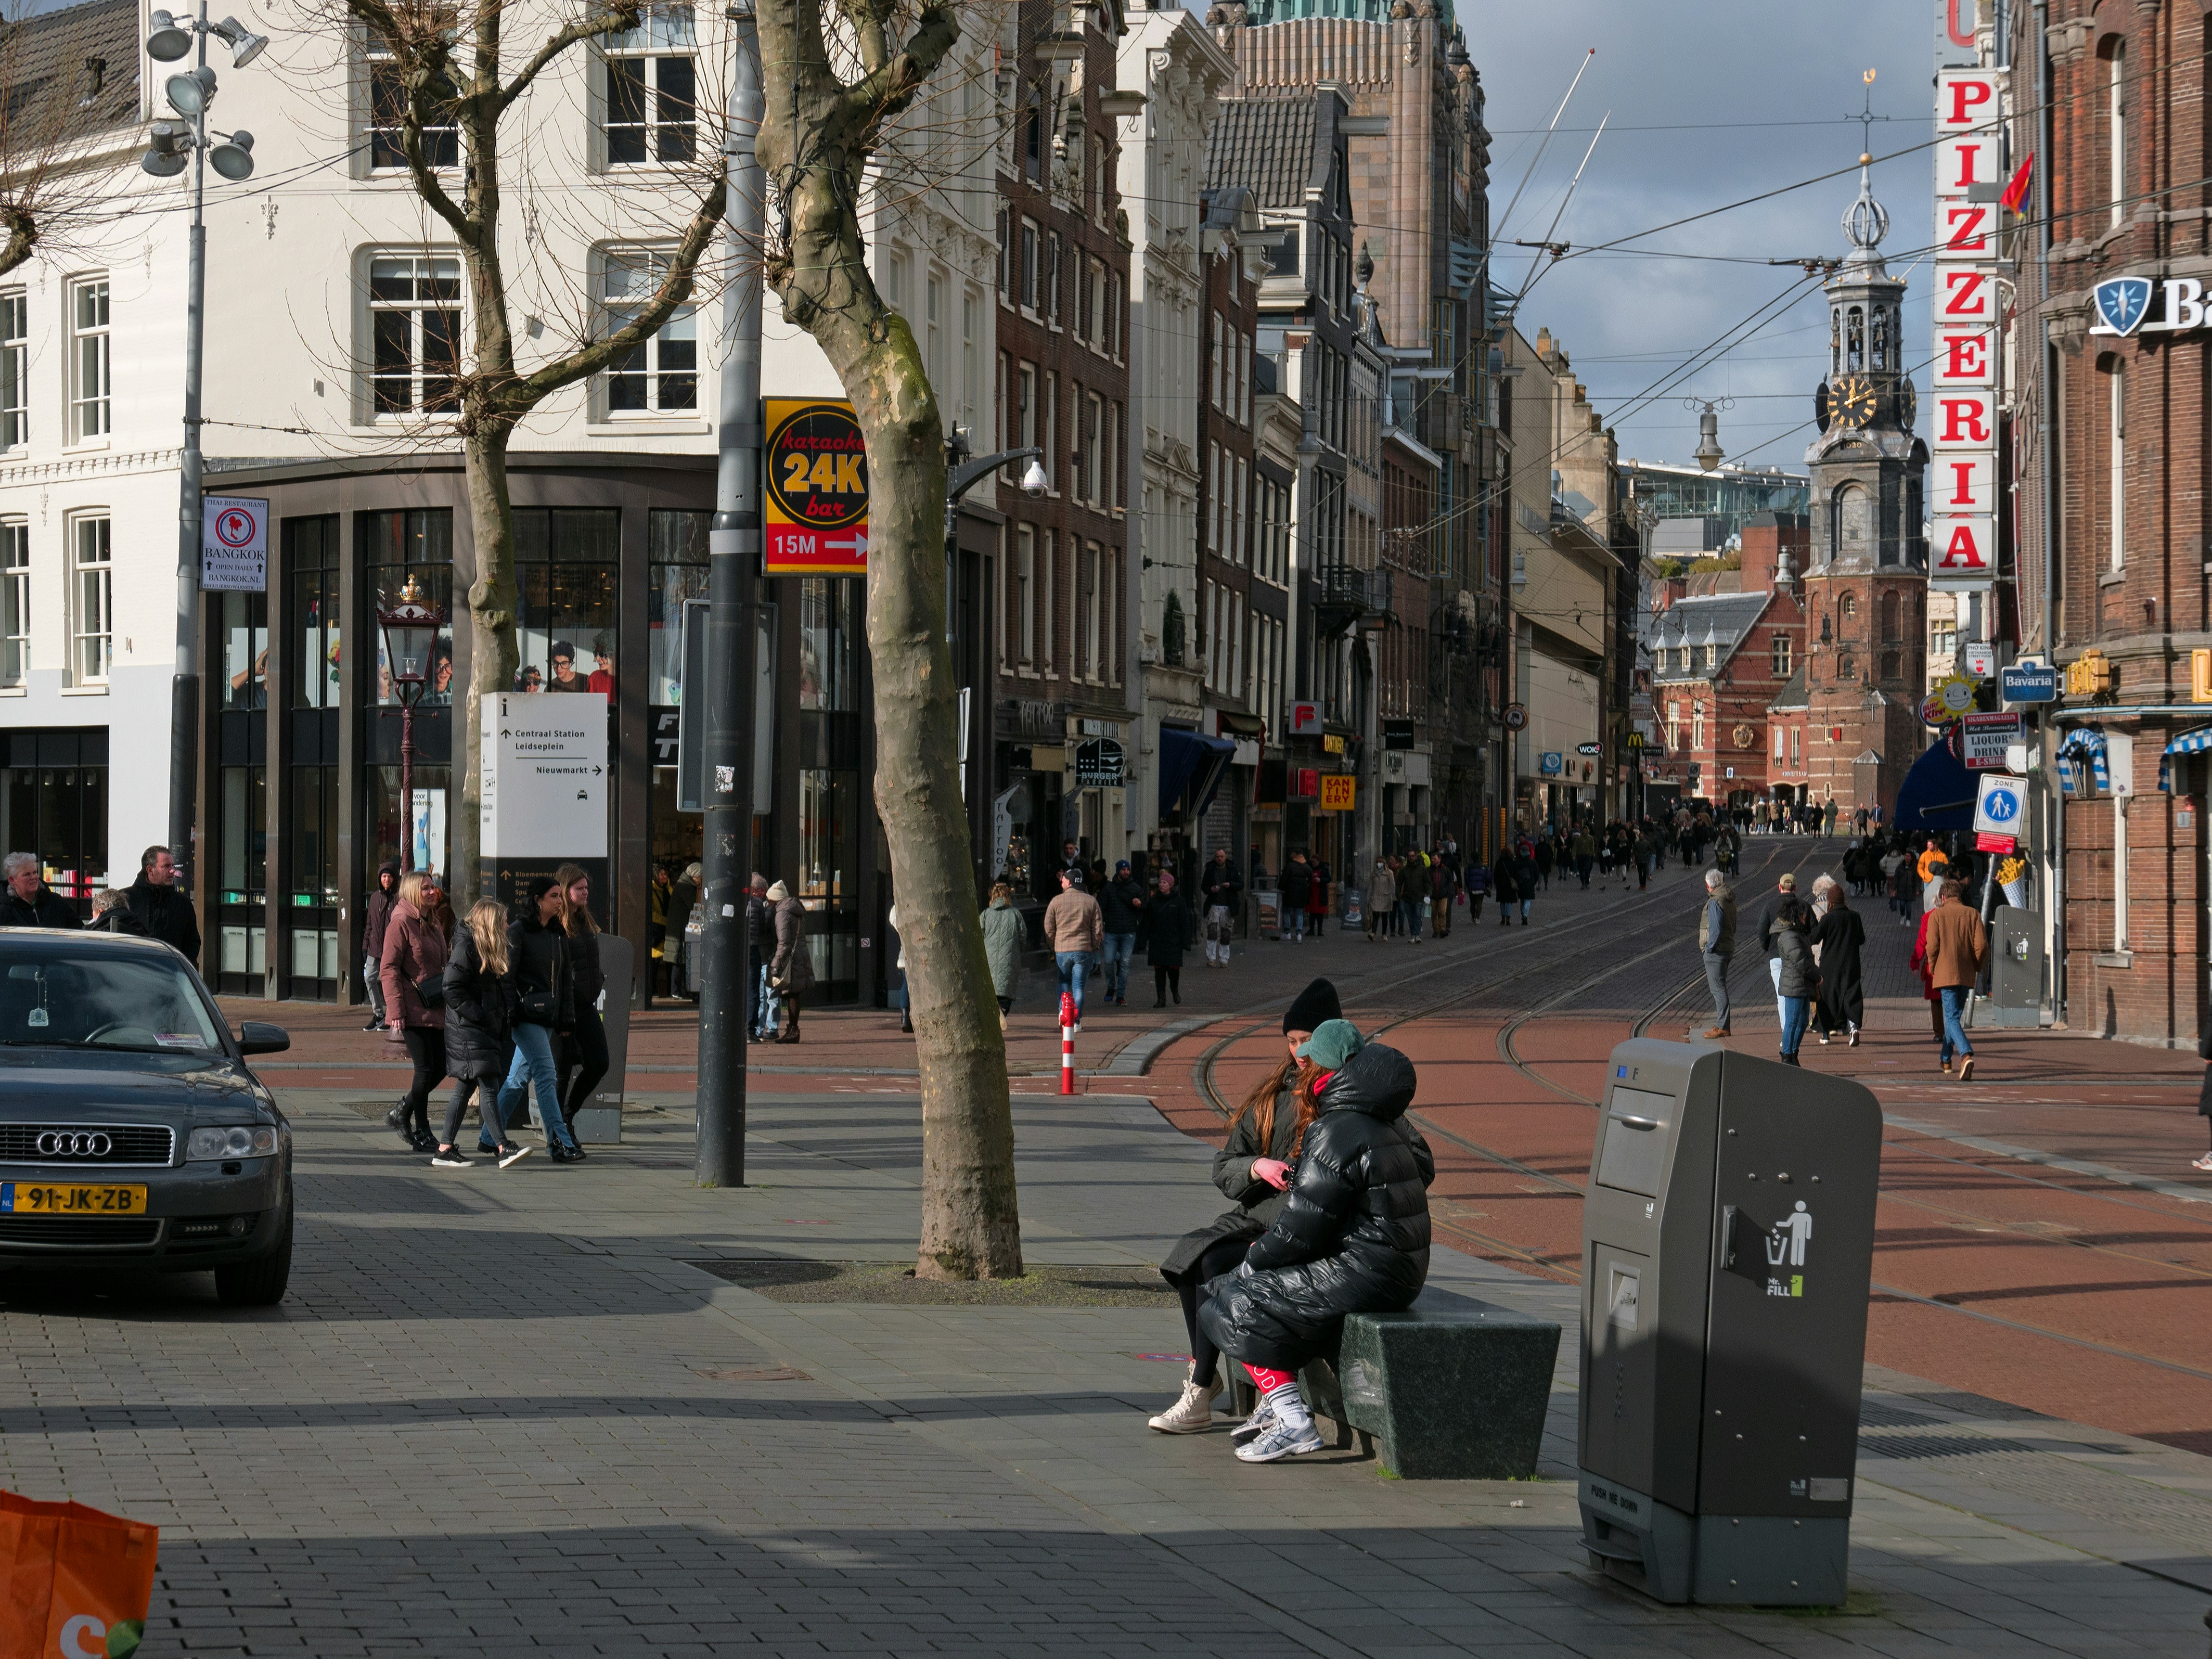 Photo Amsterdam city, free download: people are walking, talking, sitting and standing at the city square Rembrandtplein in Amsterdam downtown, on a sunny day in late winter, 19 February 2022. Photo, Fons Heijnsbroek - street photography of The Netherlands in high resolution; free image of Amsterdam, CC0. Foto van Amsterdam, gratis downloaden: mensen lopen, zitten en praten op straat in de zon op het Rembrandtplein en in de Reguliersbreestraat (zie De Munt toren!), Nederland, 2022. Foto, Fons Heijnsbroek - straatfotografie uit Nederland in hoge resolutie en rechtenvrije afbeelding, CC0